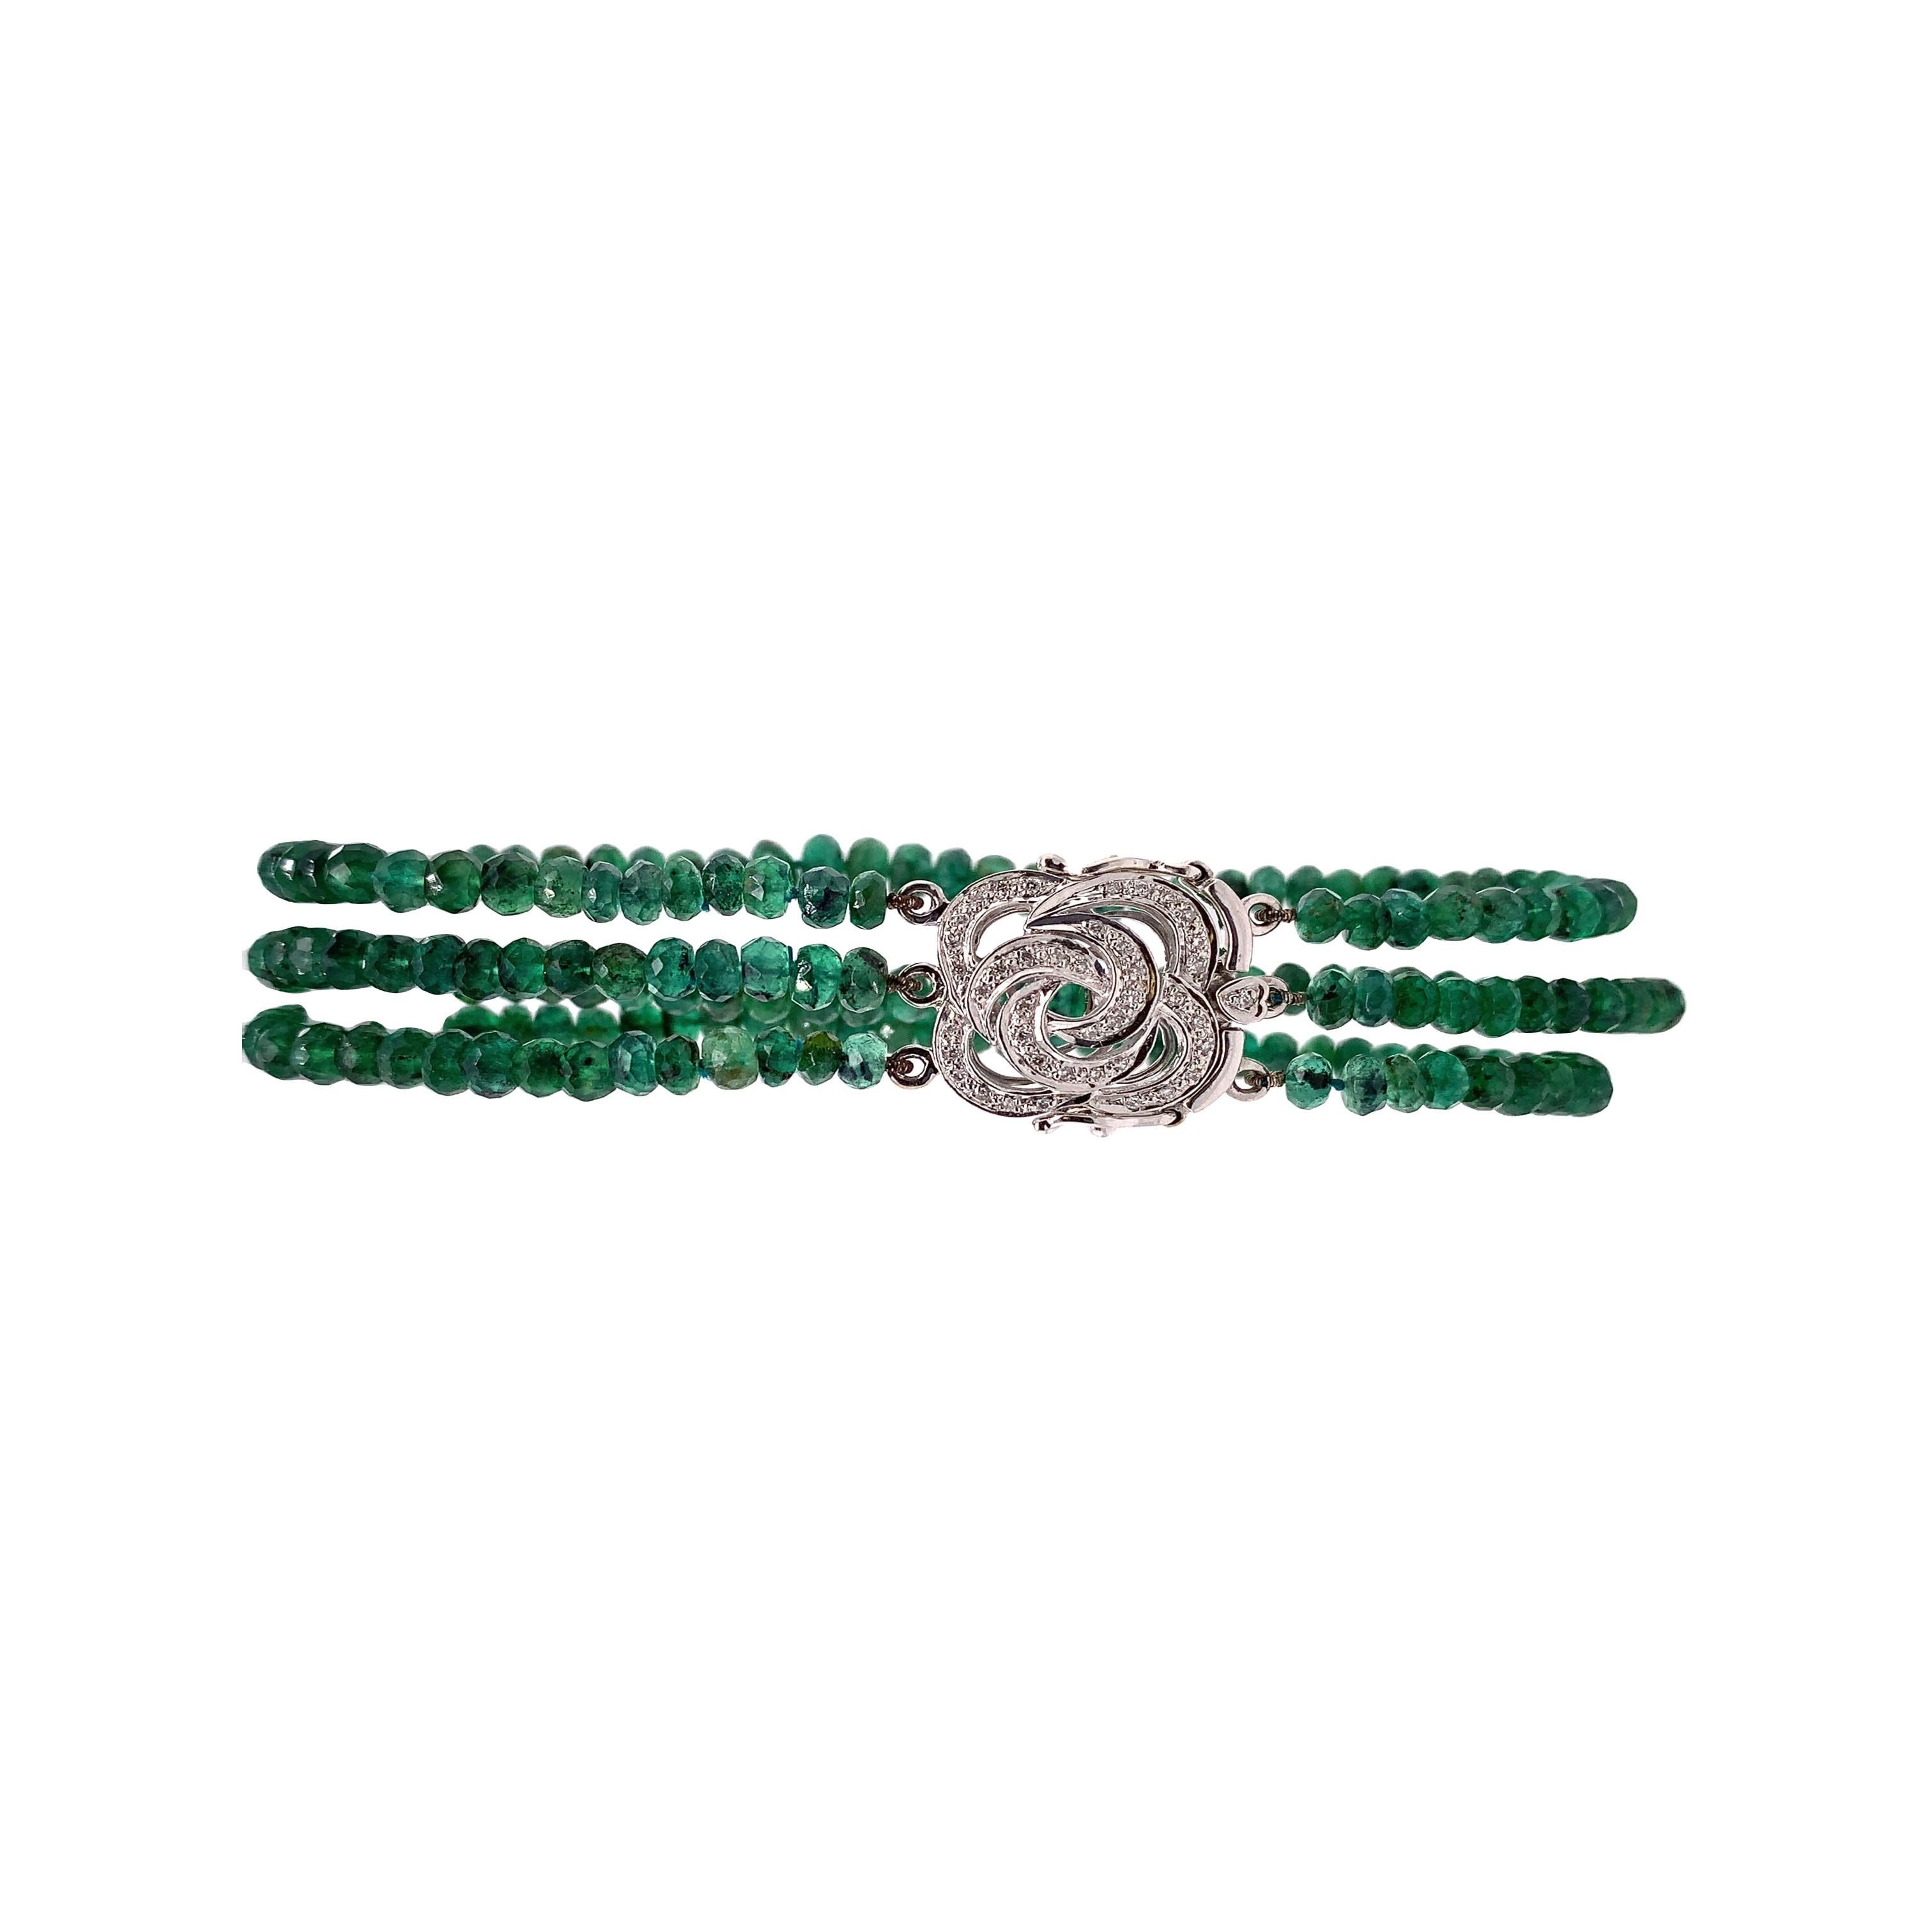 Life in color collection

This emerald beaded and diamond bracelet is a timeless treasure. The three rows of emerald beads are woven together with a flower shape diamond lock clasp for a secure fit. Diamond lock is made of 18K White Gold.

Emerald: